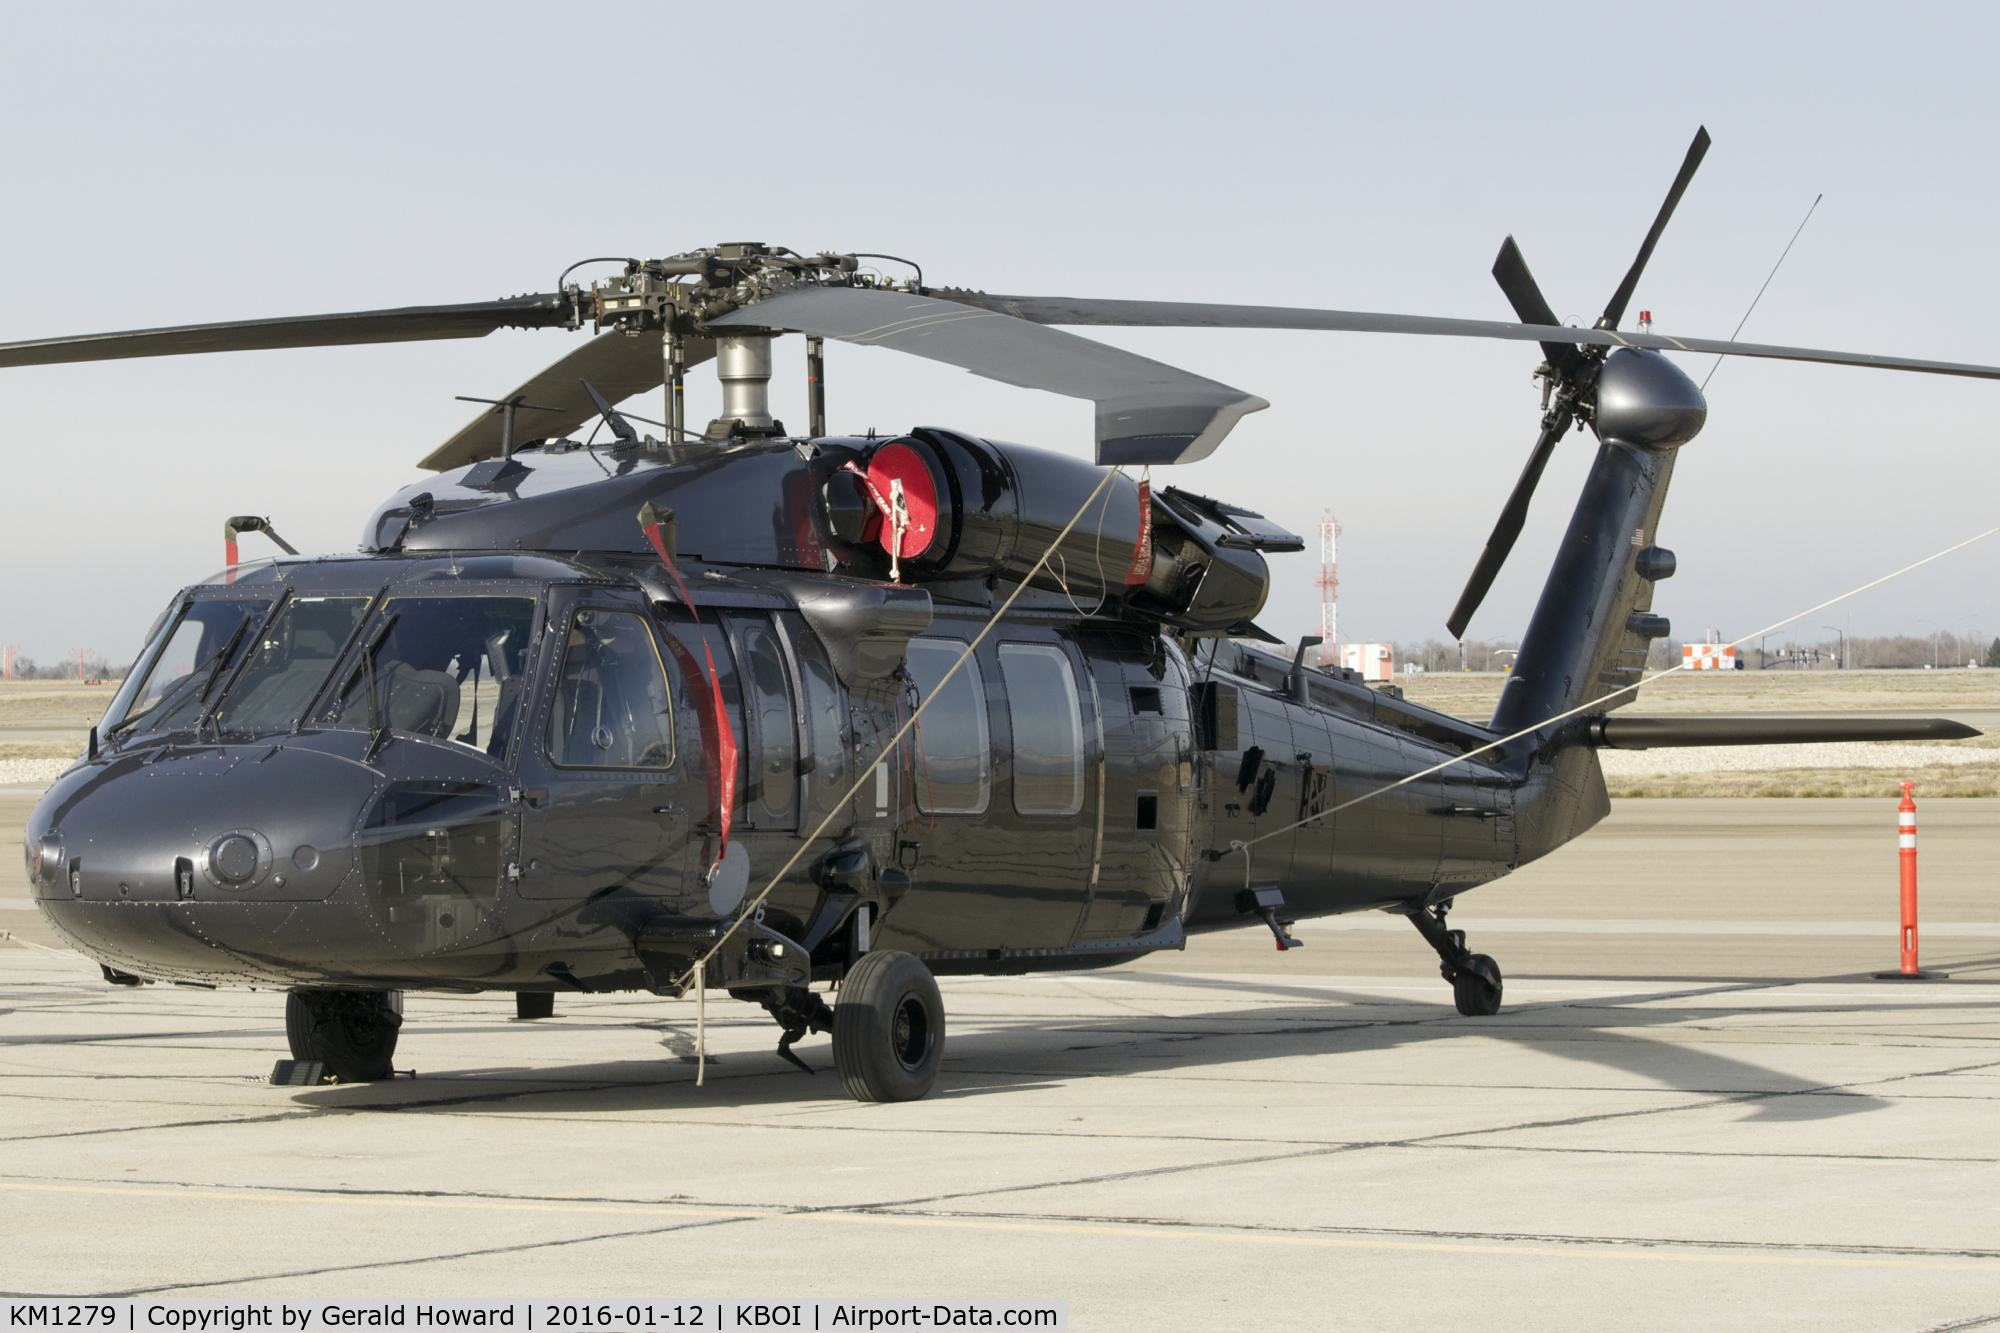 KM1279, 1980 Sikorsky S-70A Black Hawk C/N 70-224, Parked on south GA ramp. Only marking 